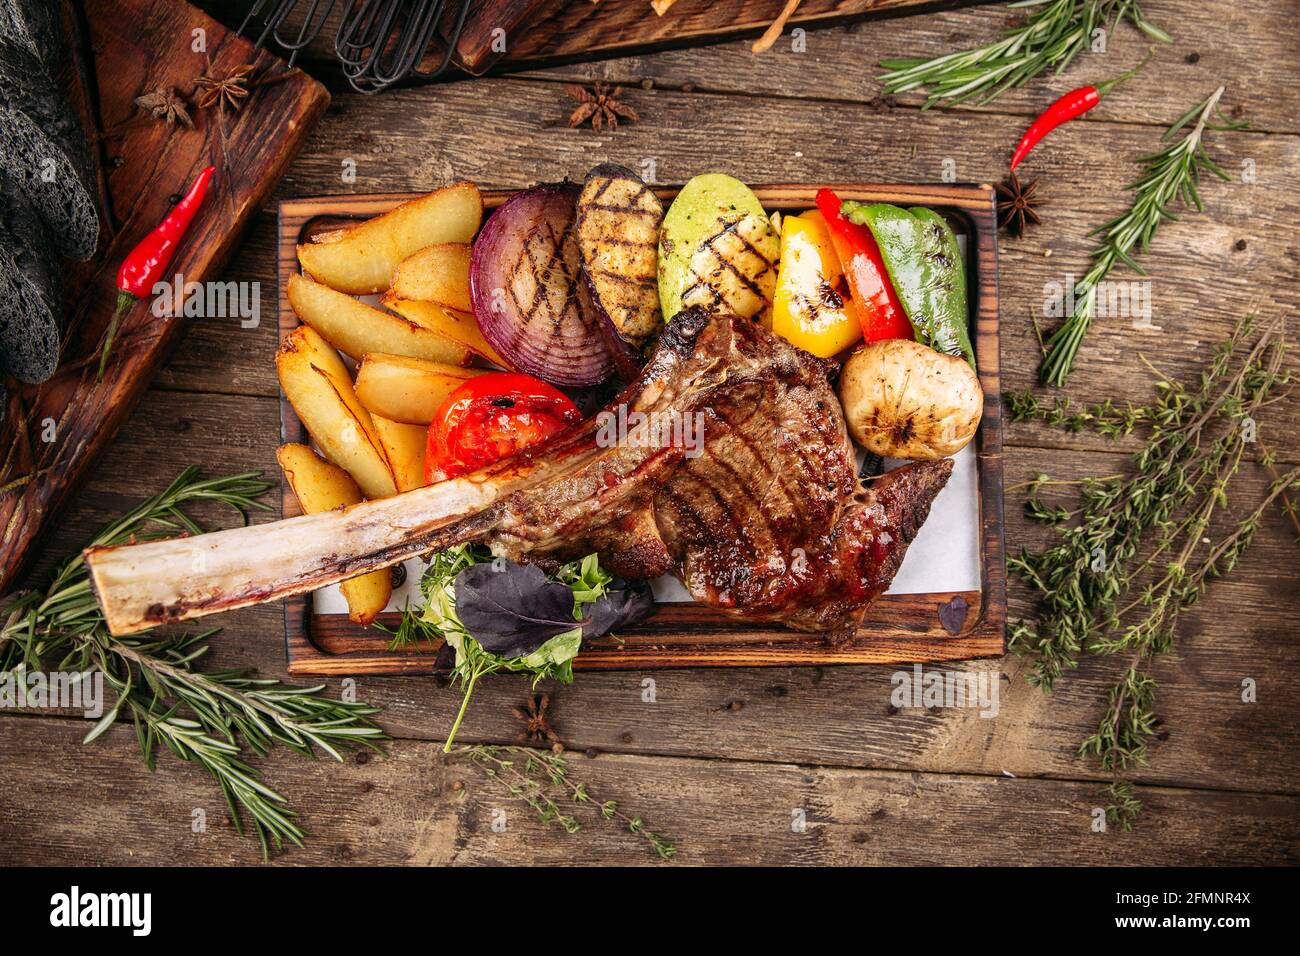 Grilled beef tomahawk steak with vegetables Stock Photo